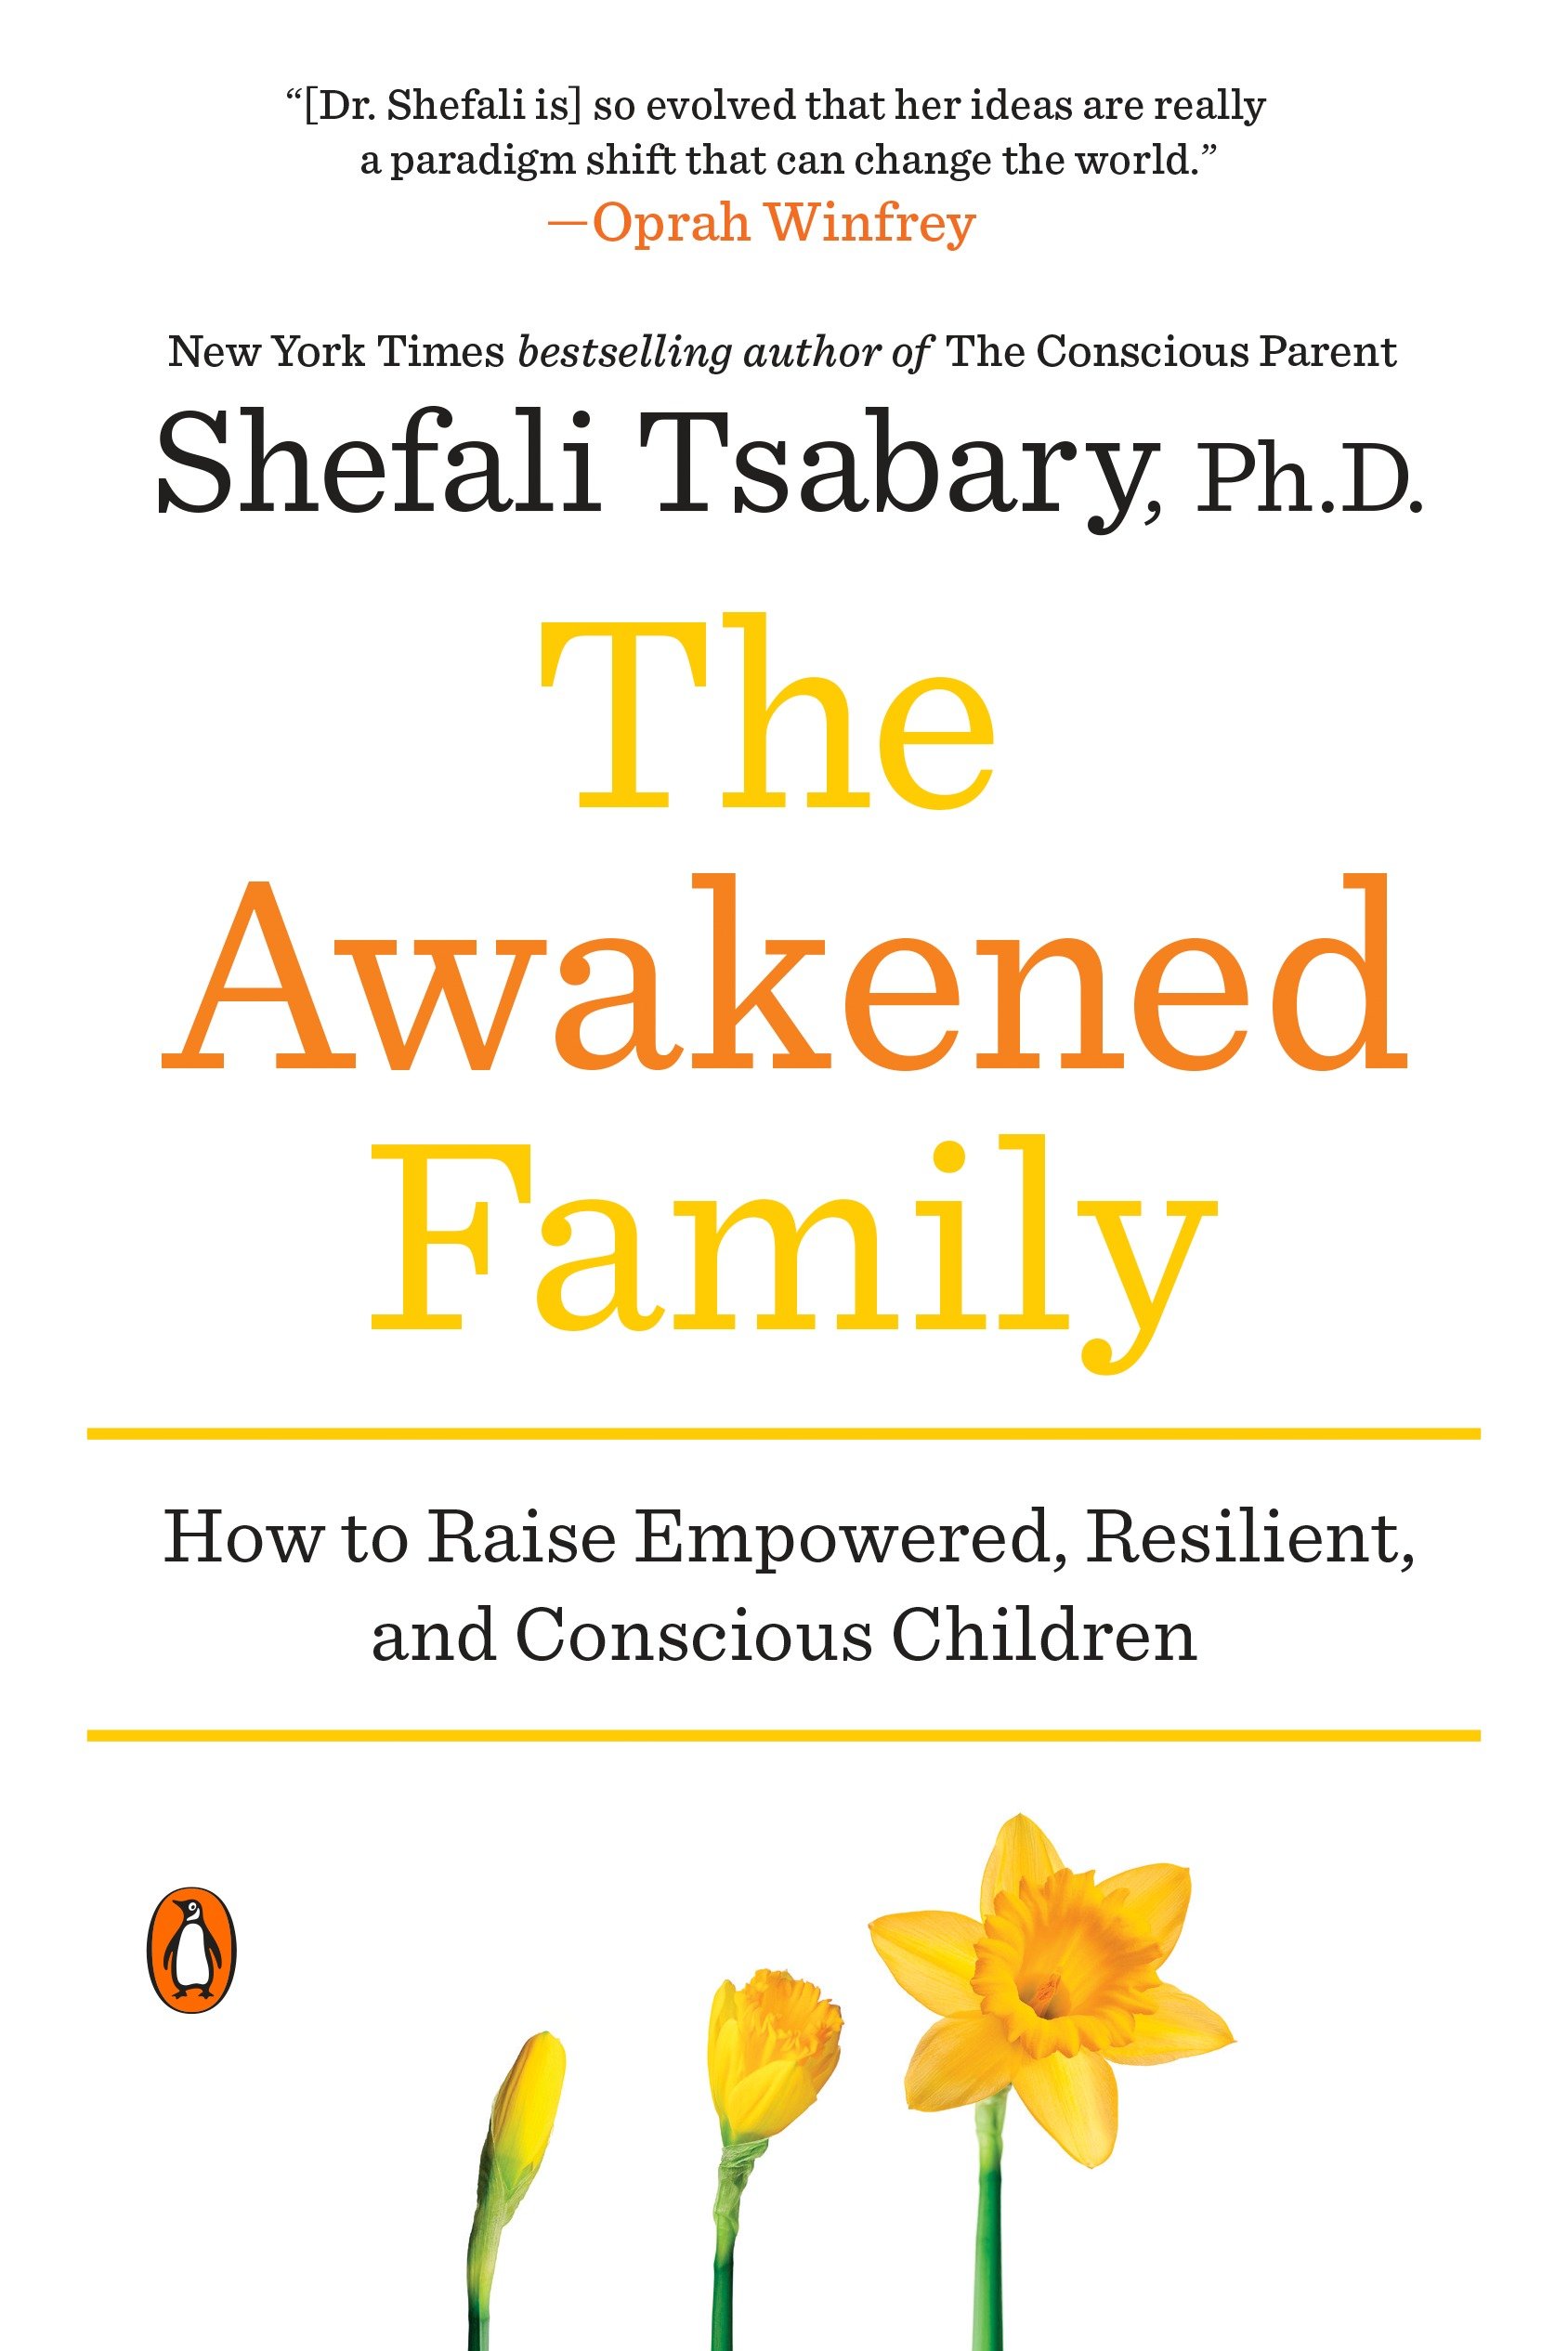 Image de couverture de The Awakened Family [electronic resource] : How to Raise Empowered, Resilient, and Conscious Children